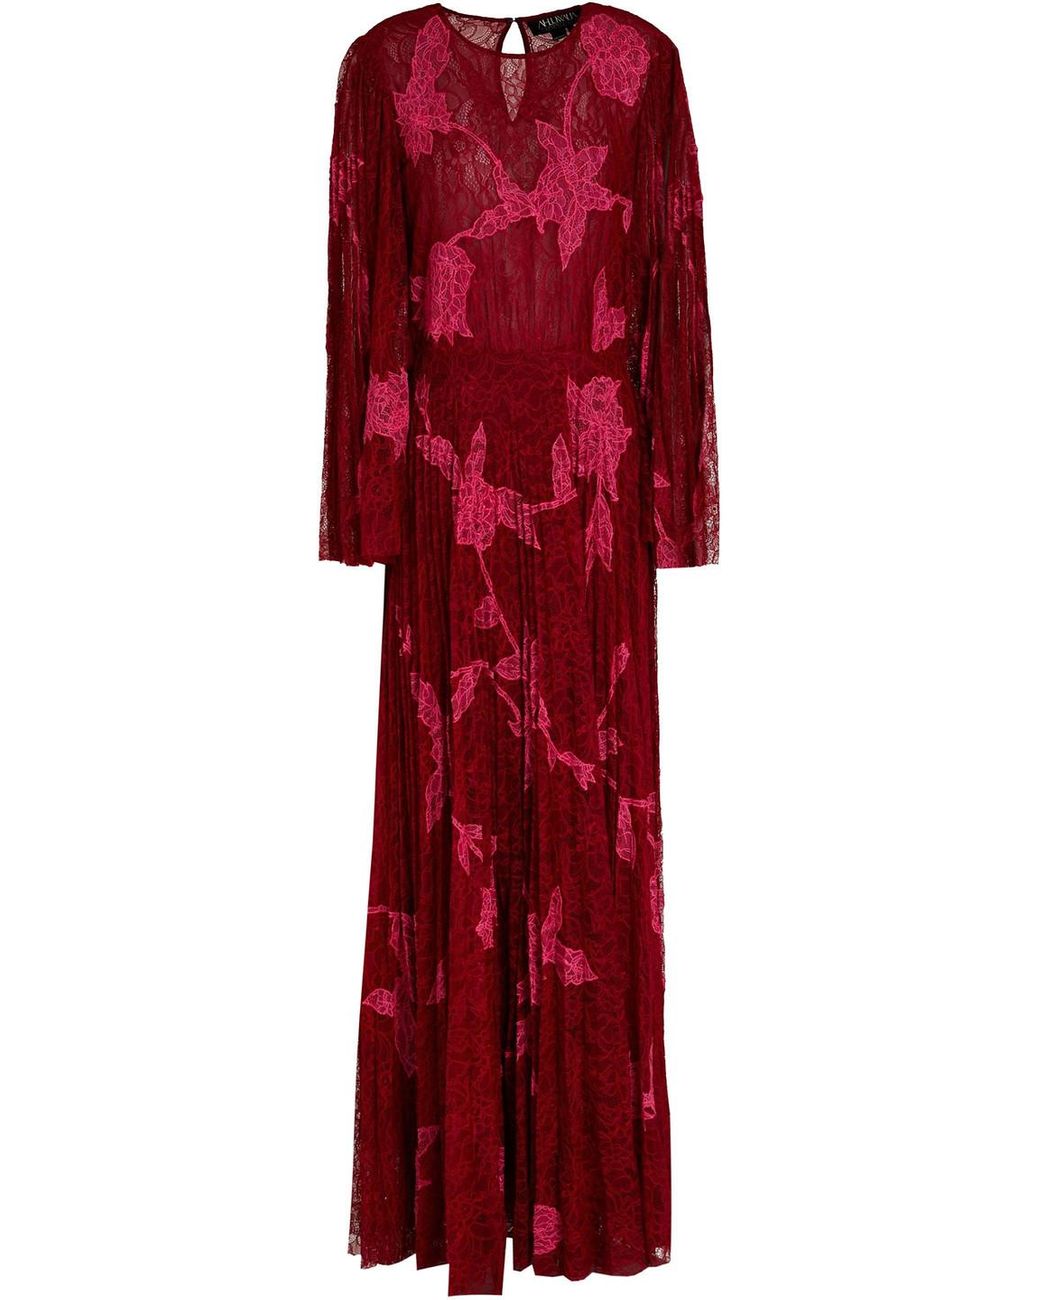 Sachin & Babi Modi Pleated Corded Lace Gown in Burgundy (Red) | Lyst Canada